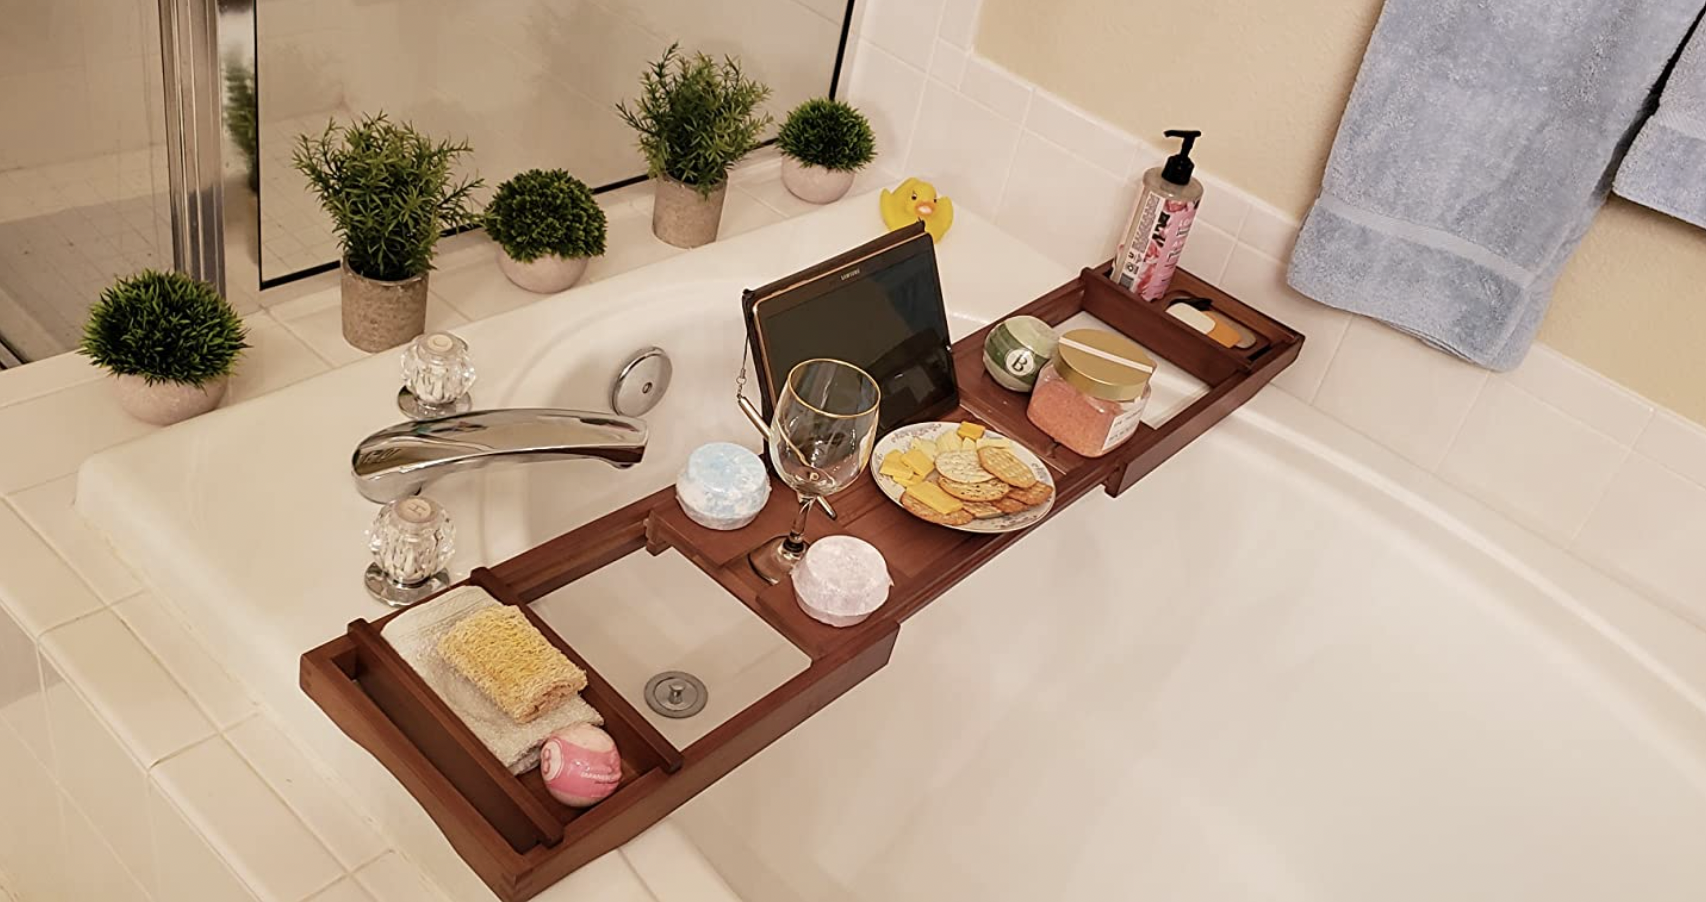 Reviewer image of a wooden bath caddy holding an iPad, cheese plate, candle, wine glass, bath salts